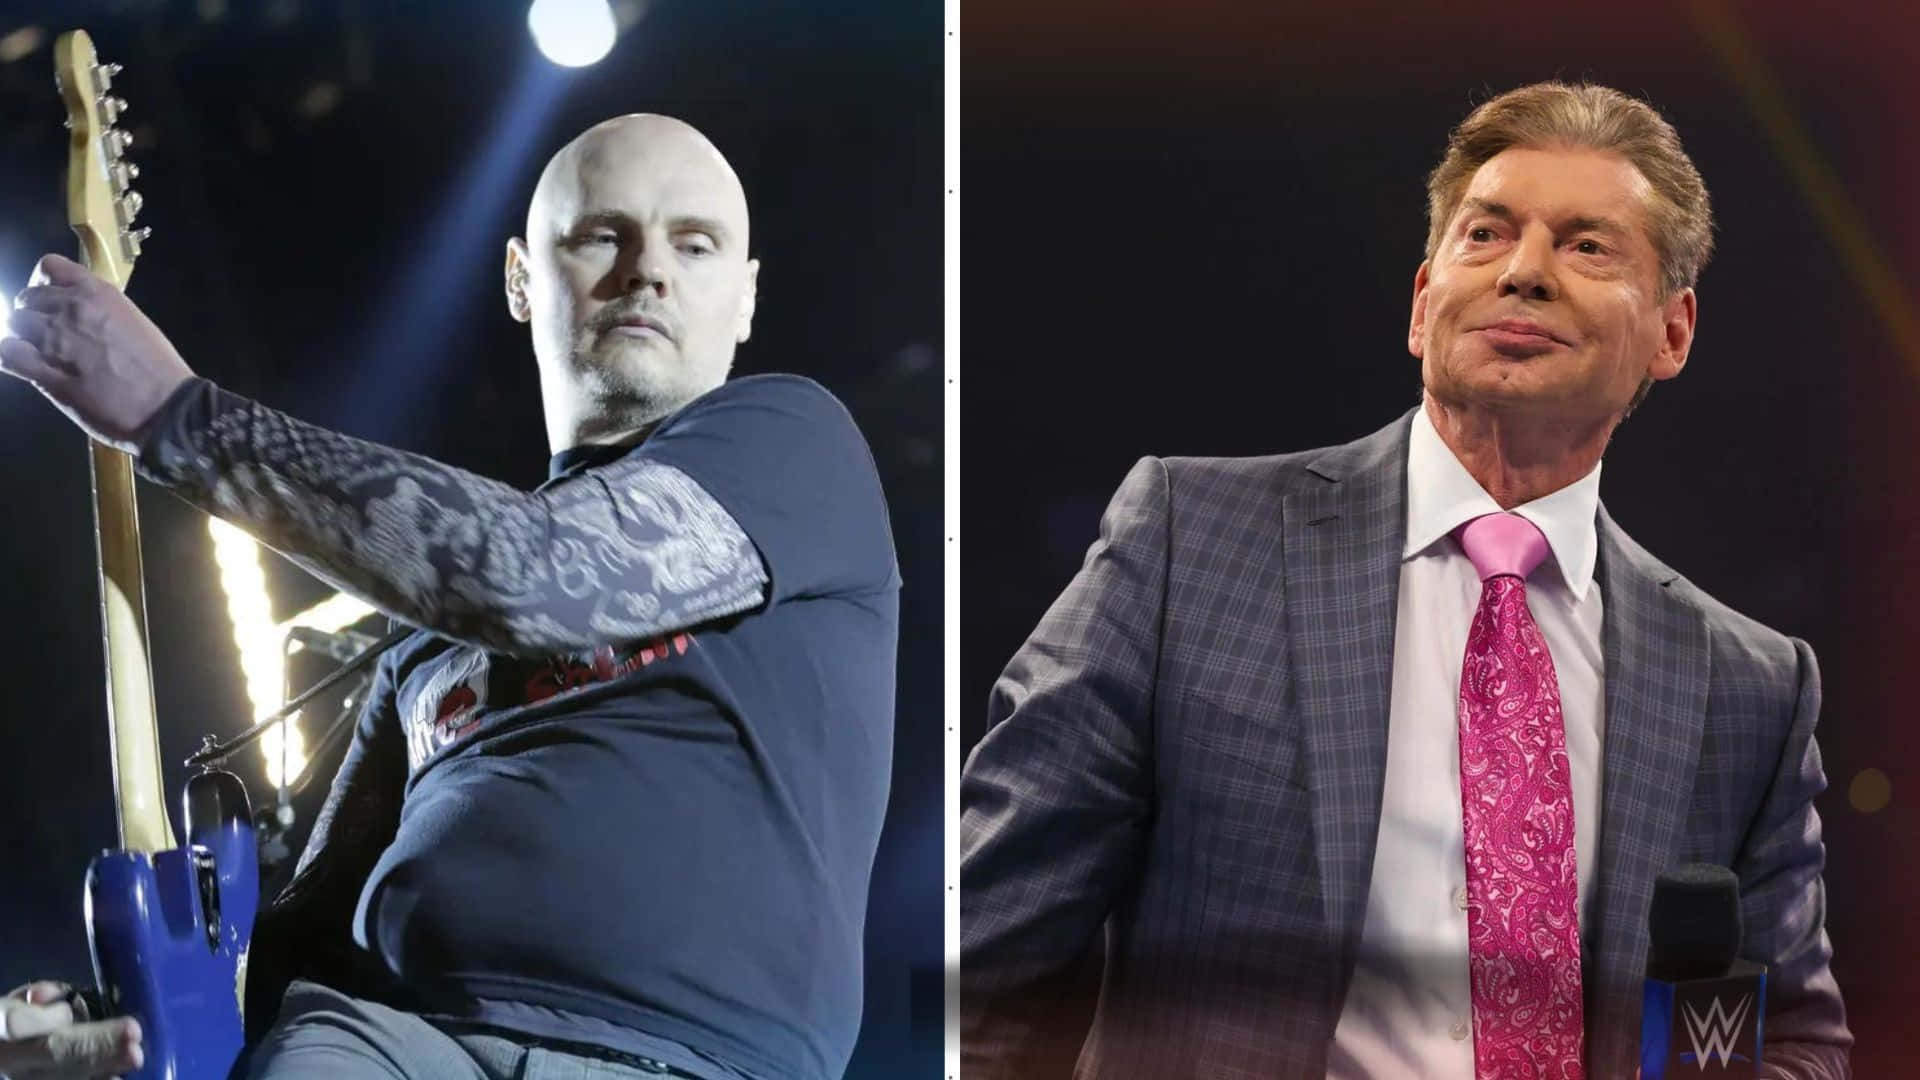 Vincemcmahon Och Billy Corgan. (no Additional Context Given To Provide A Computer Or Mobile Wallpaper Specific Translation.) Wallpaper